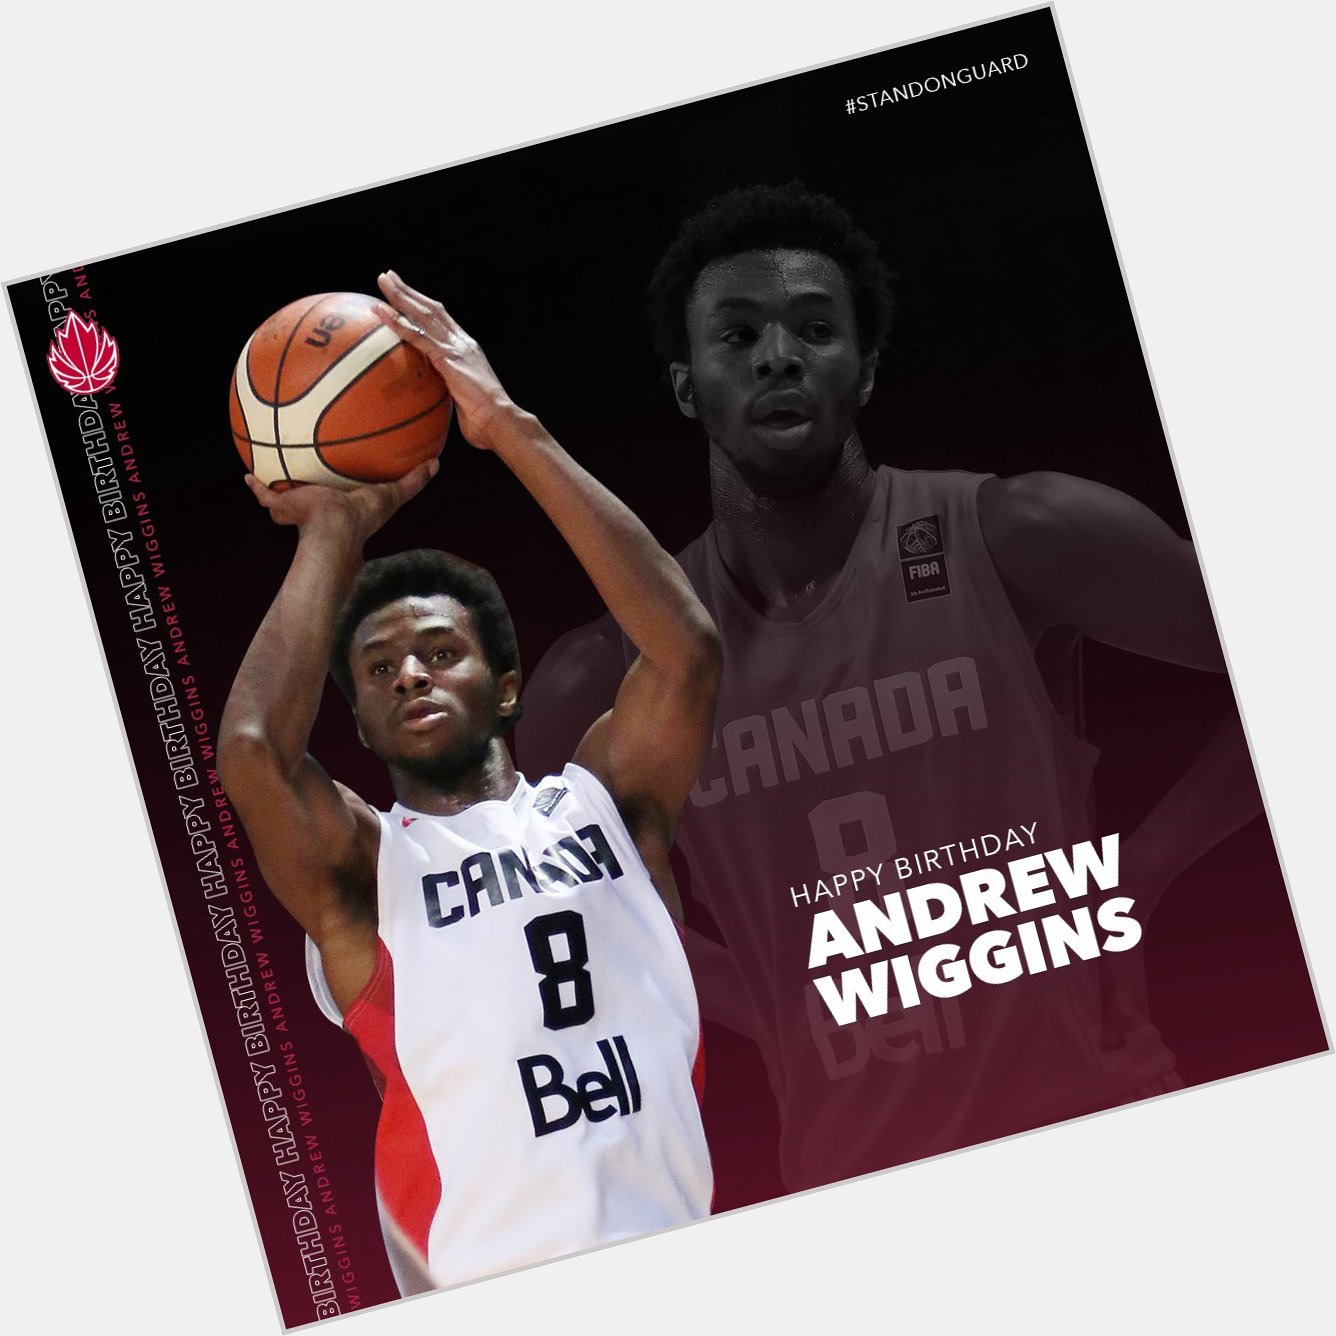 Happy 25th Birthday to Andrew Wiggins       